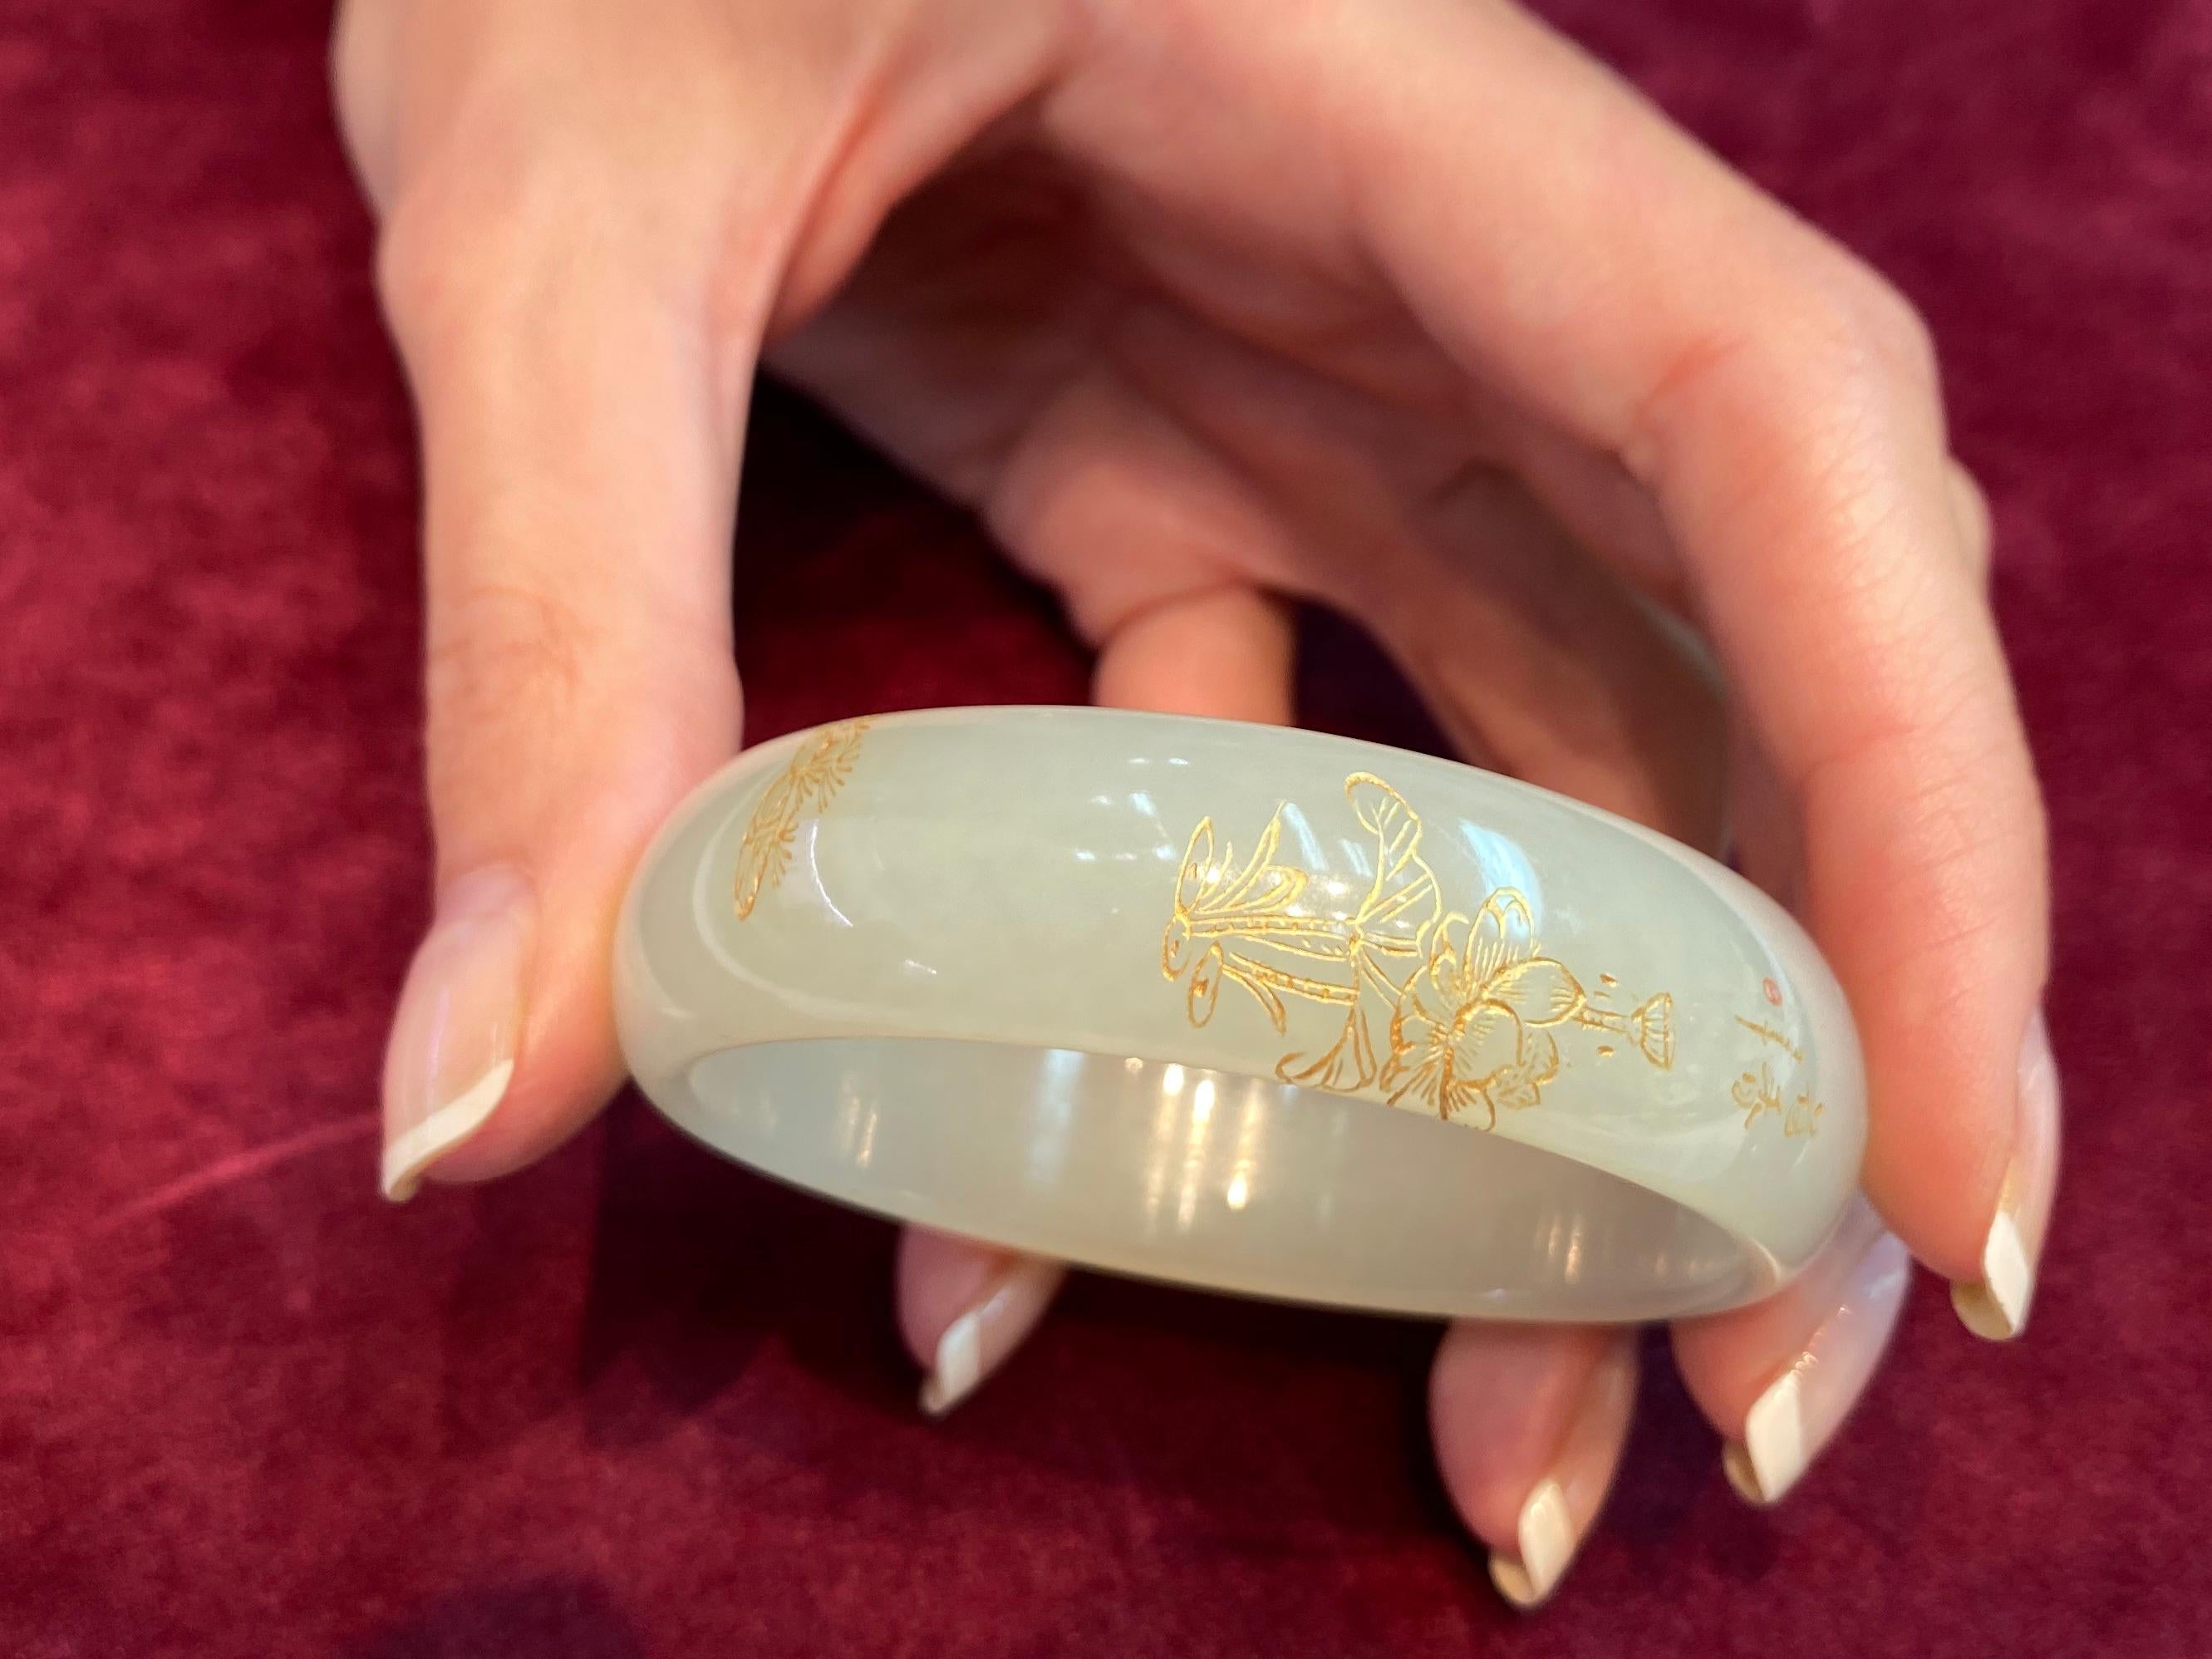 For your consideration is a certified natural nephrite jade bangle. This natural nephrite jade bangle is nicely carved and inlaid with gold. The carving of flowers are intricate. The two larger Chinese characters means 